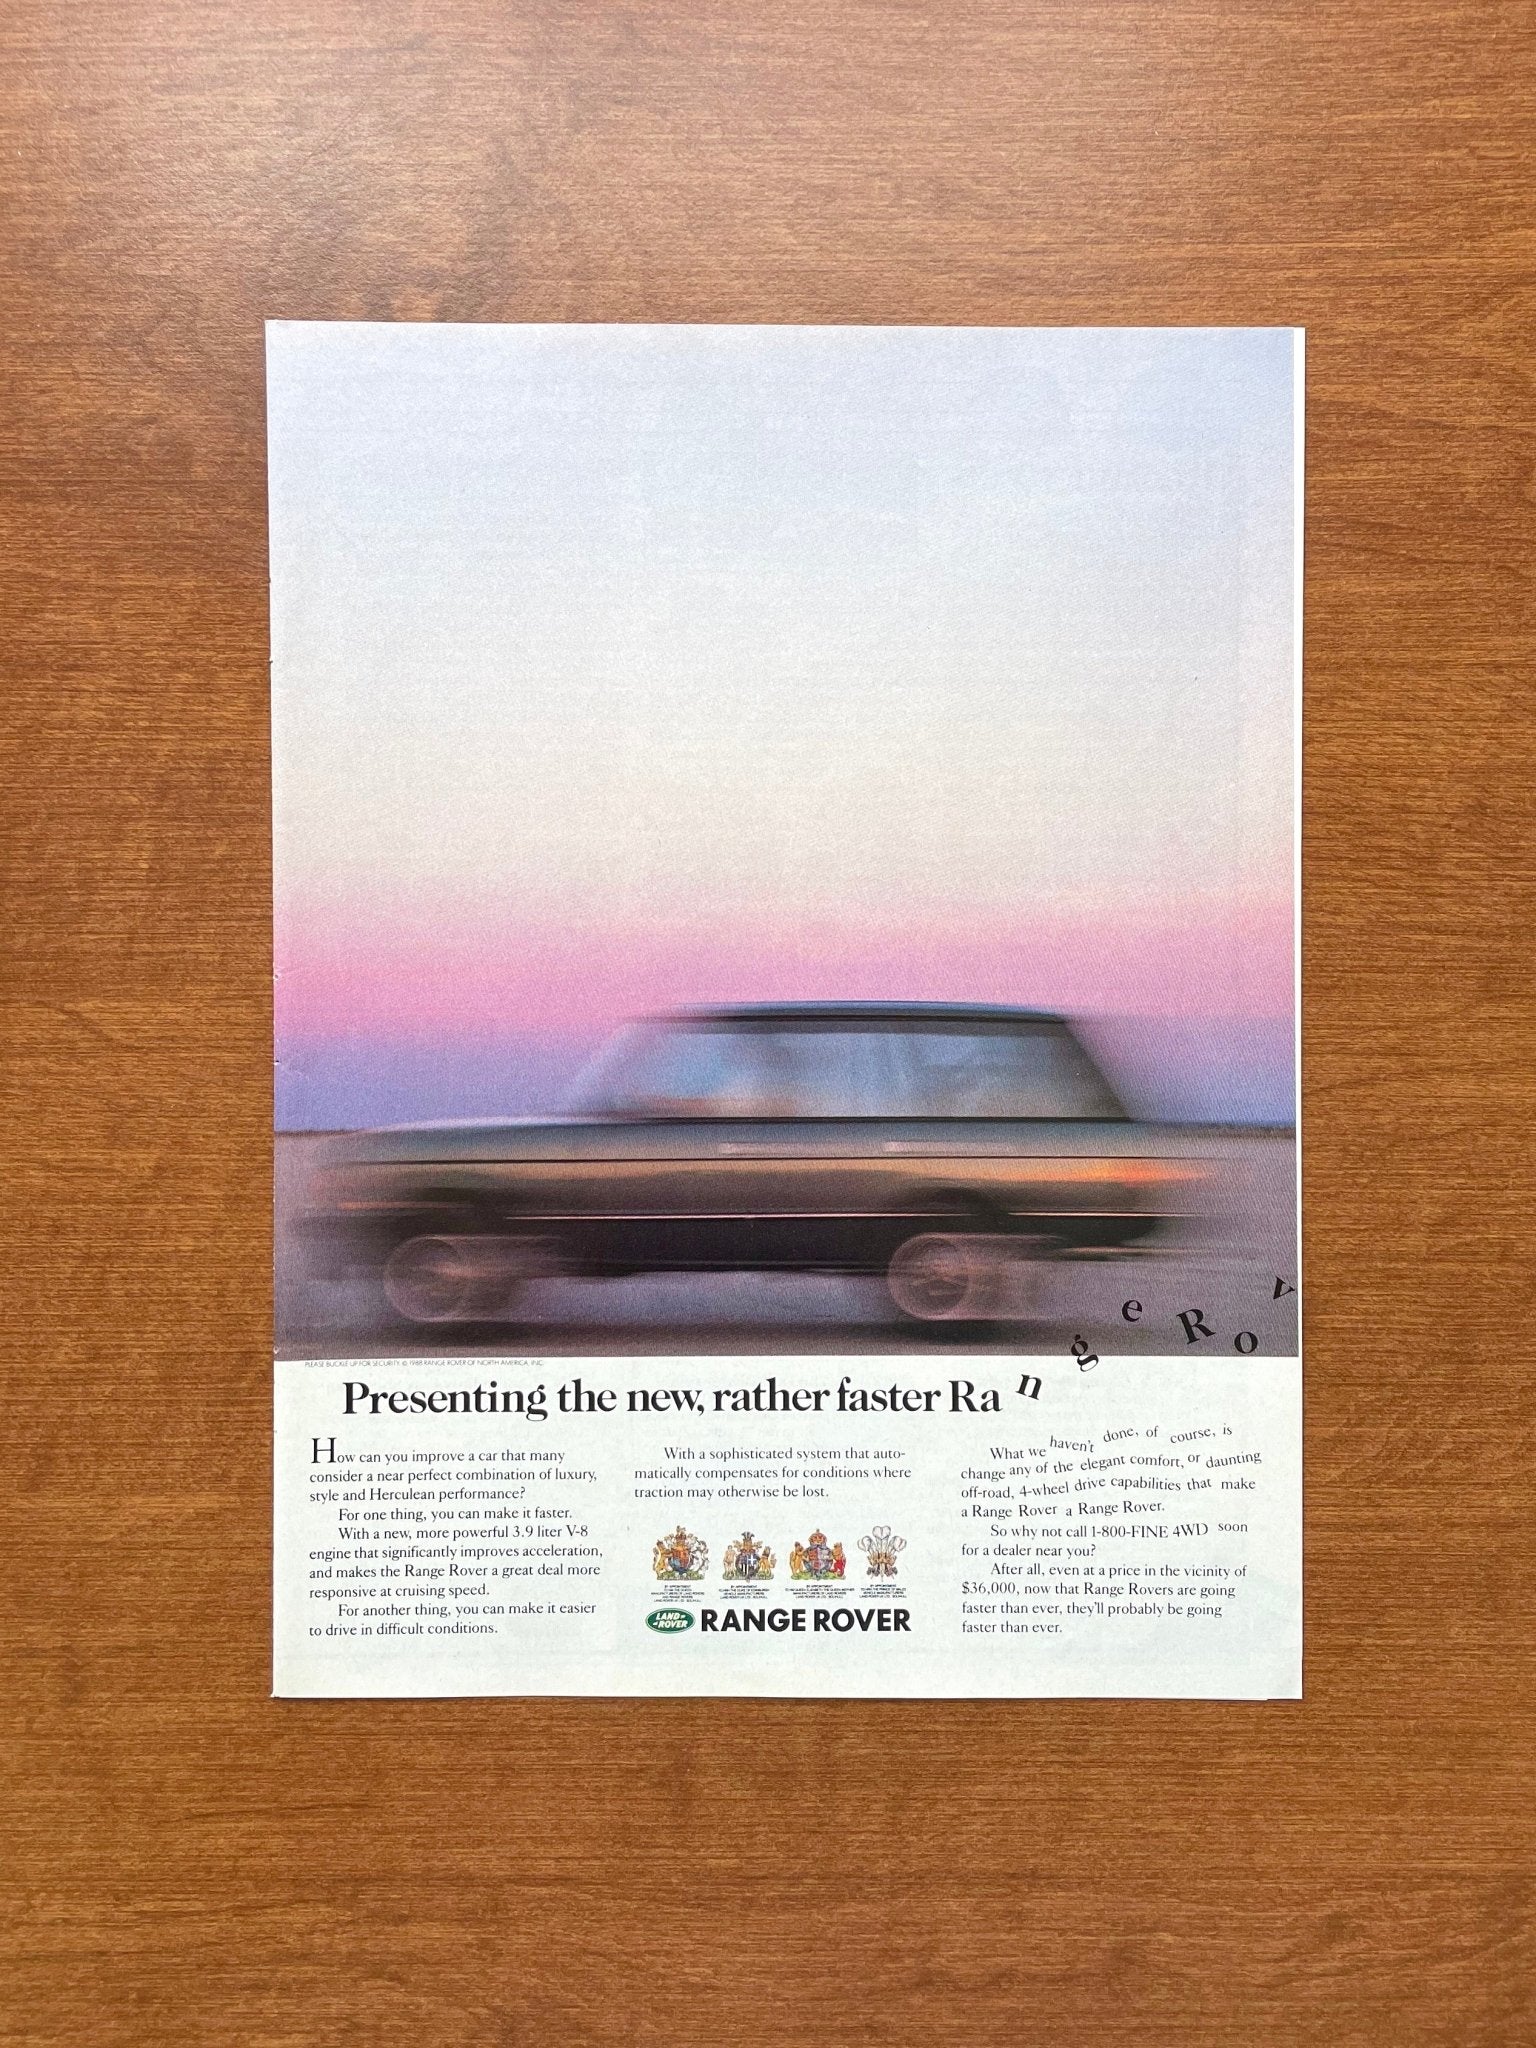 1987 Land Rover Range Rover "rather faster Ra n g..." Advertisement